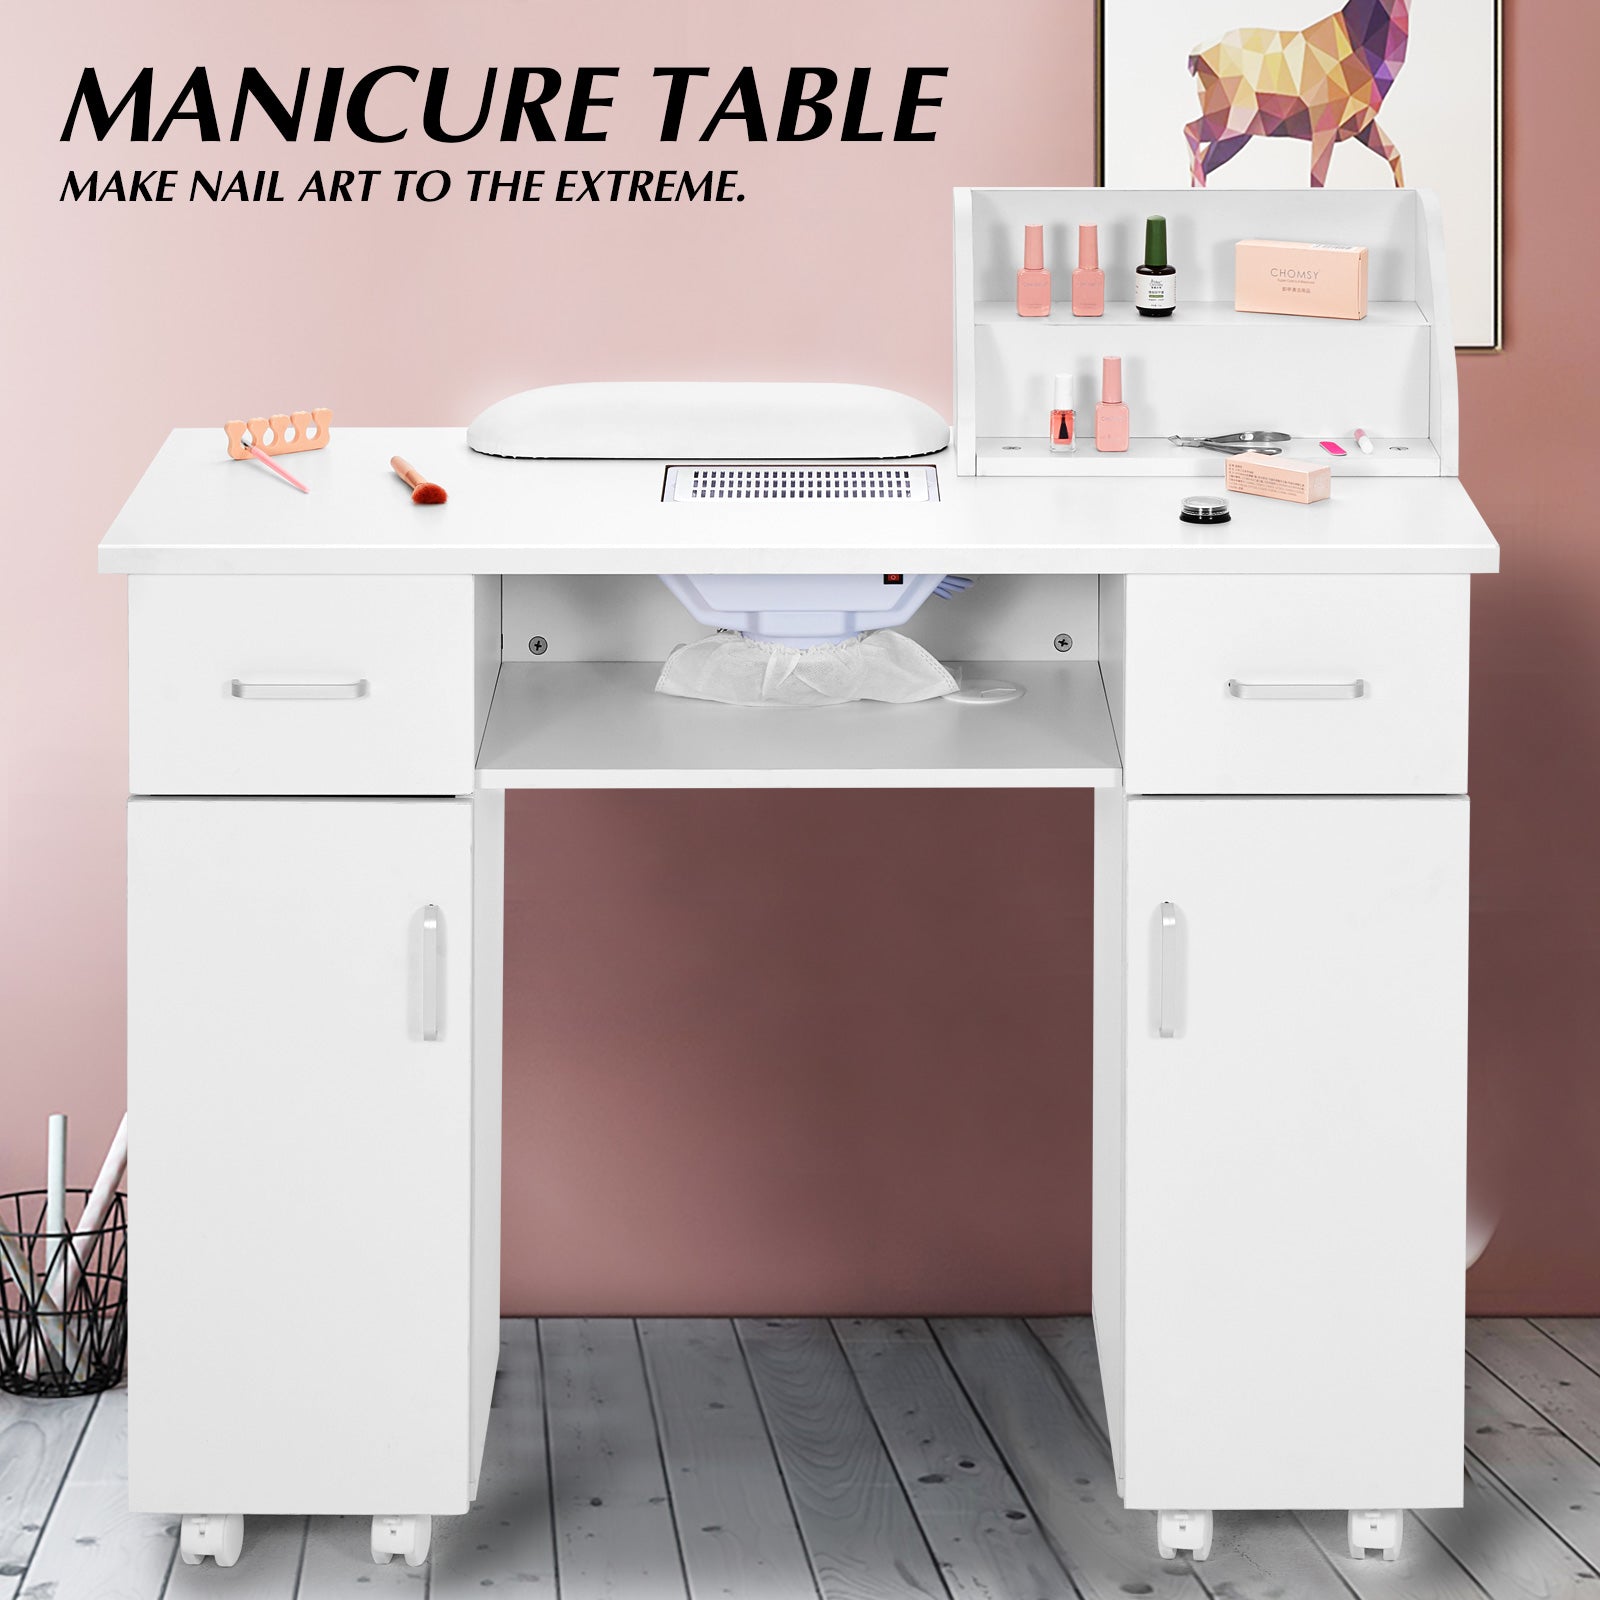 #7015 Manicure Table, Nail Table, Storage Rack, Wooden drawers, Nail desk, Beauty Workstation, Wrist Cushion, Lockable Wheels